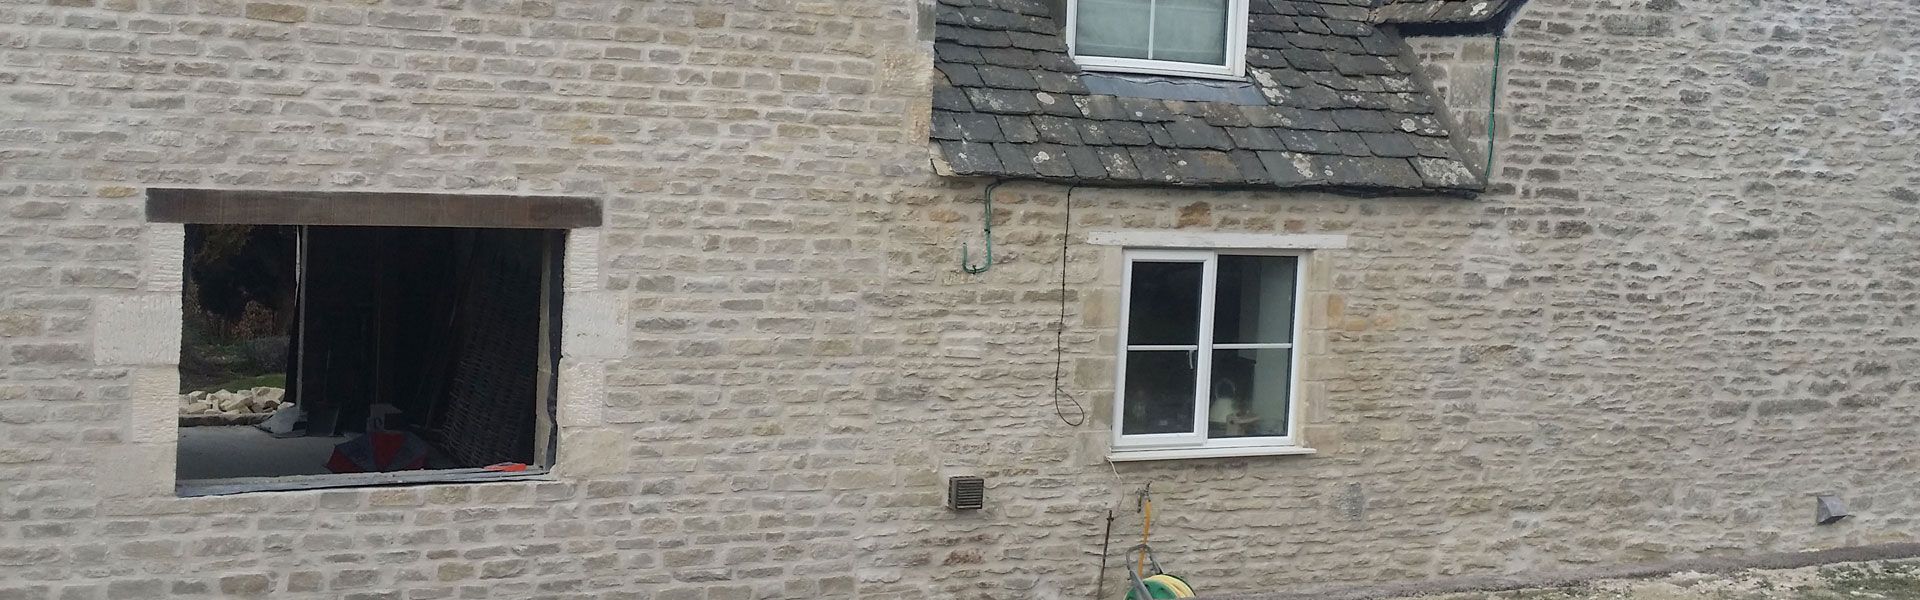 Lime mortar specialists